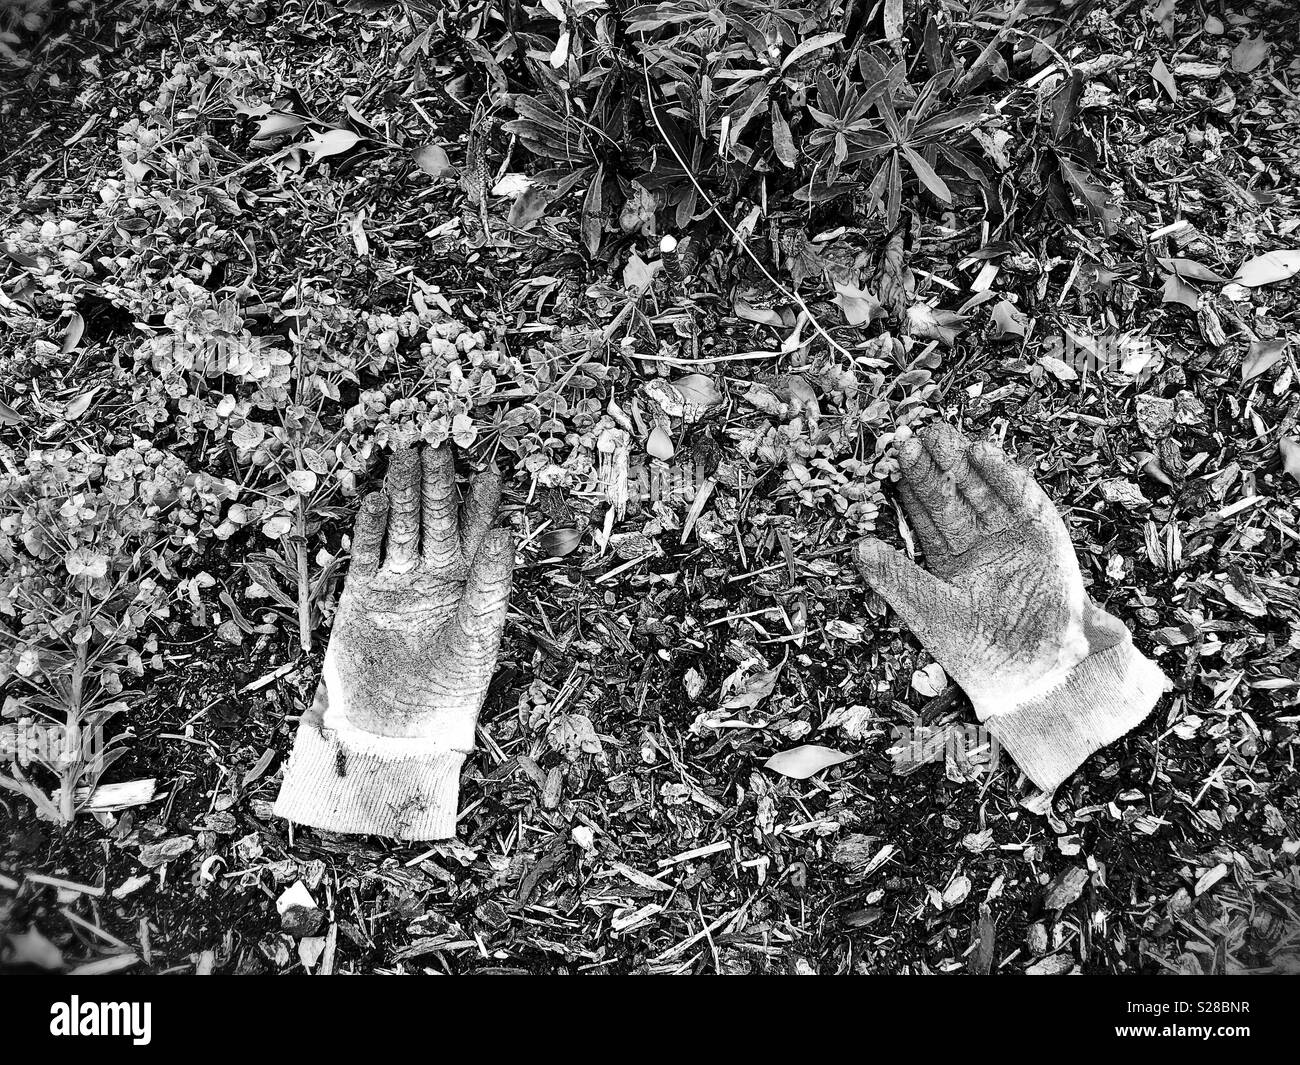 Dirty gardening gloves on the ground. Stock Photo